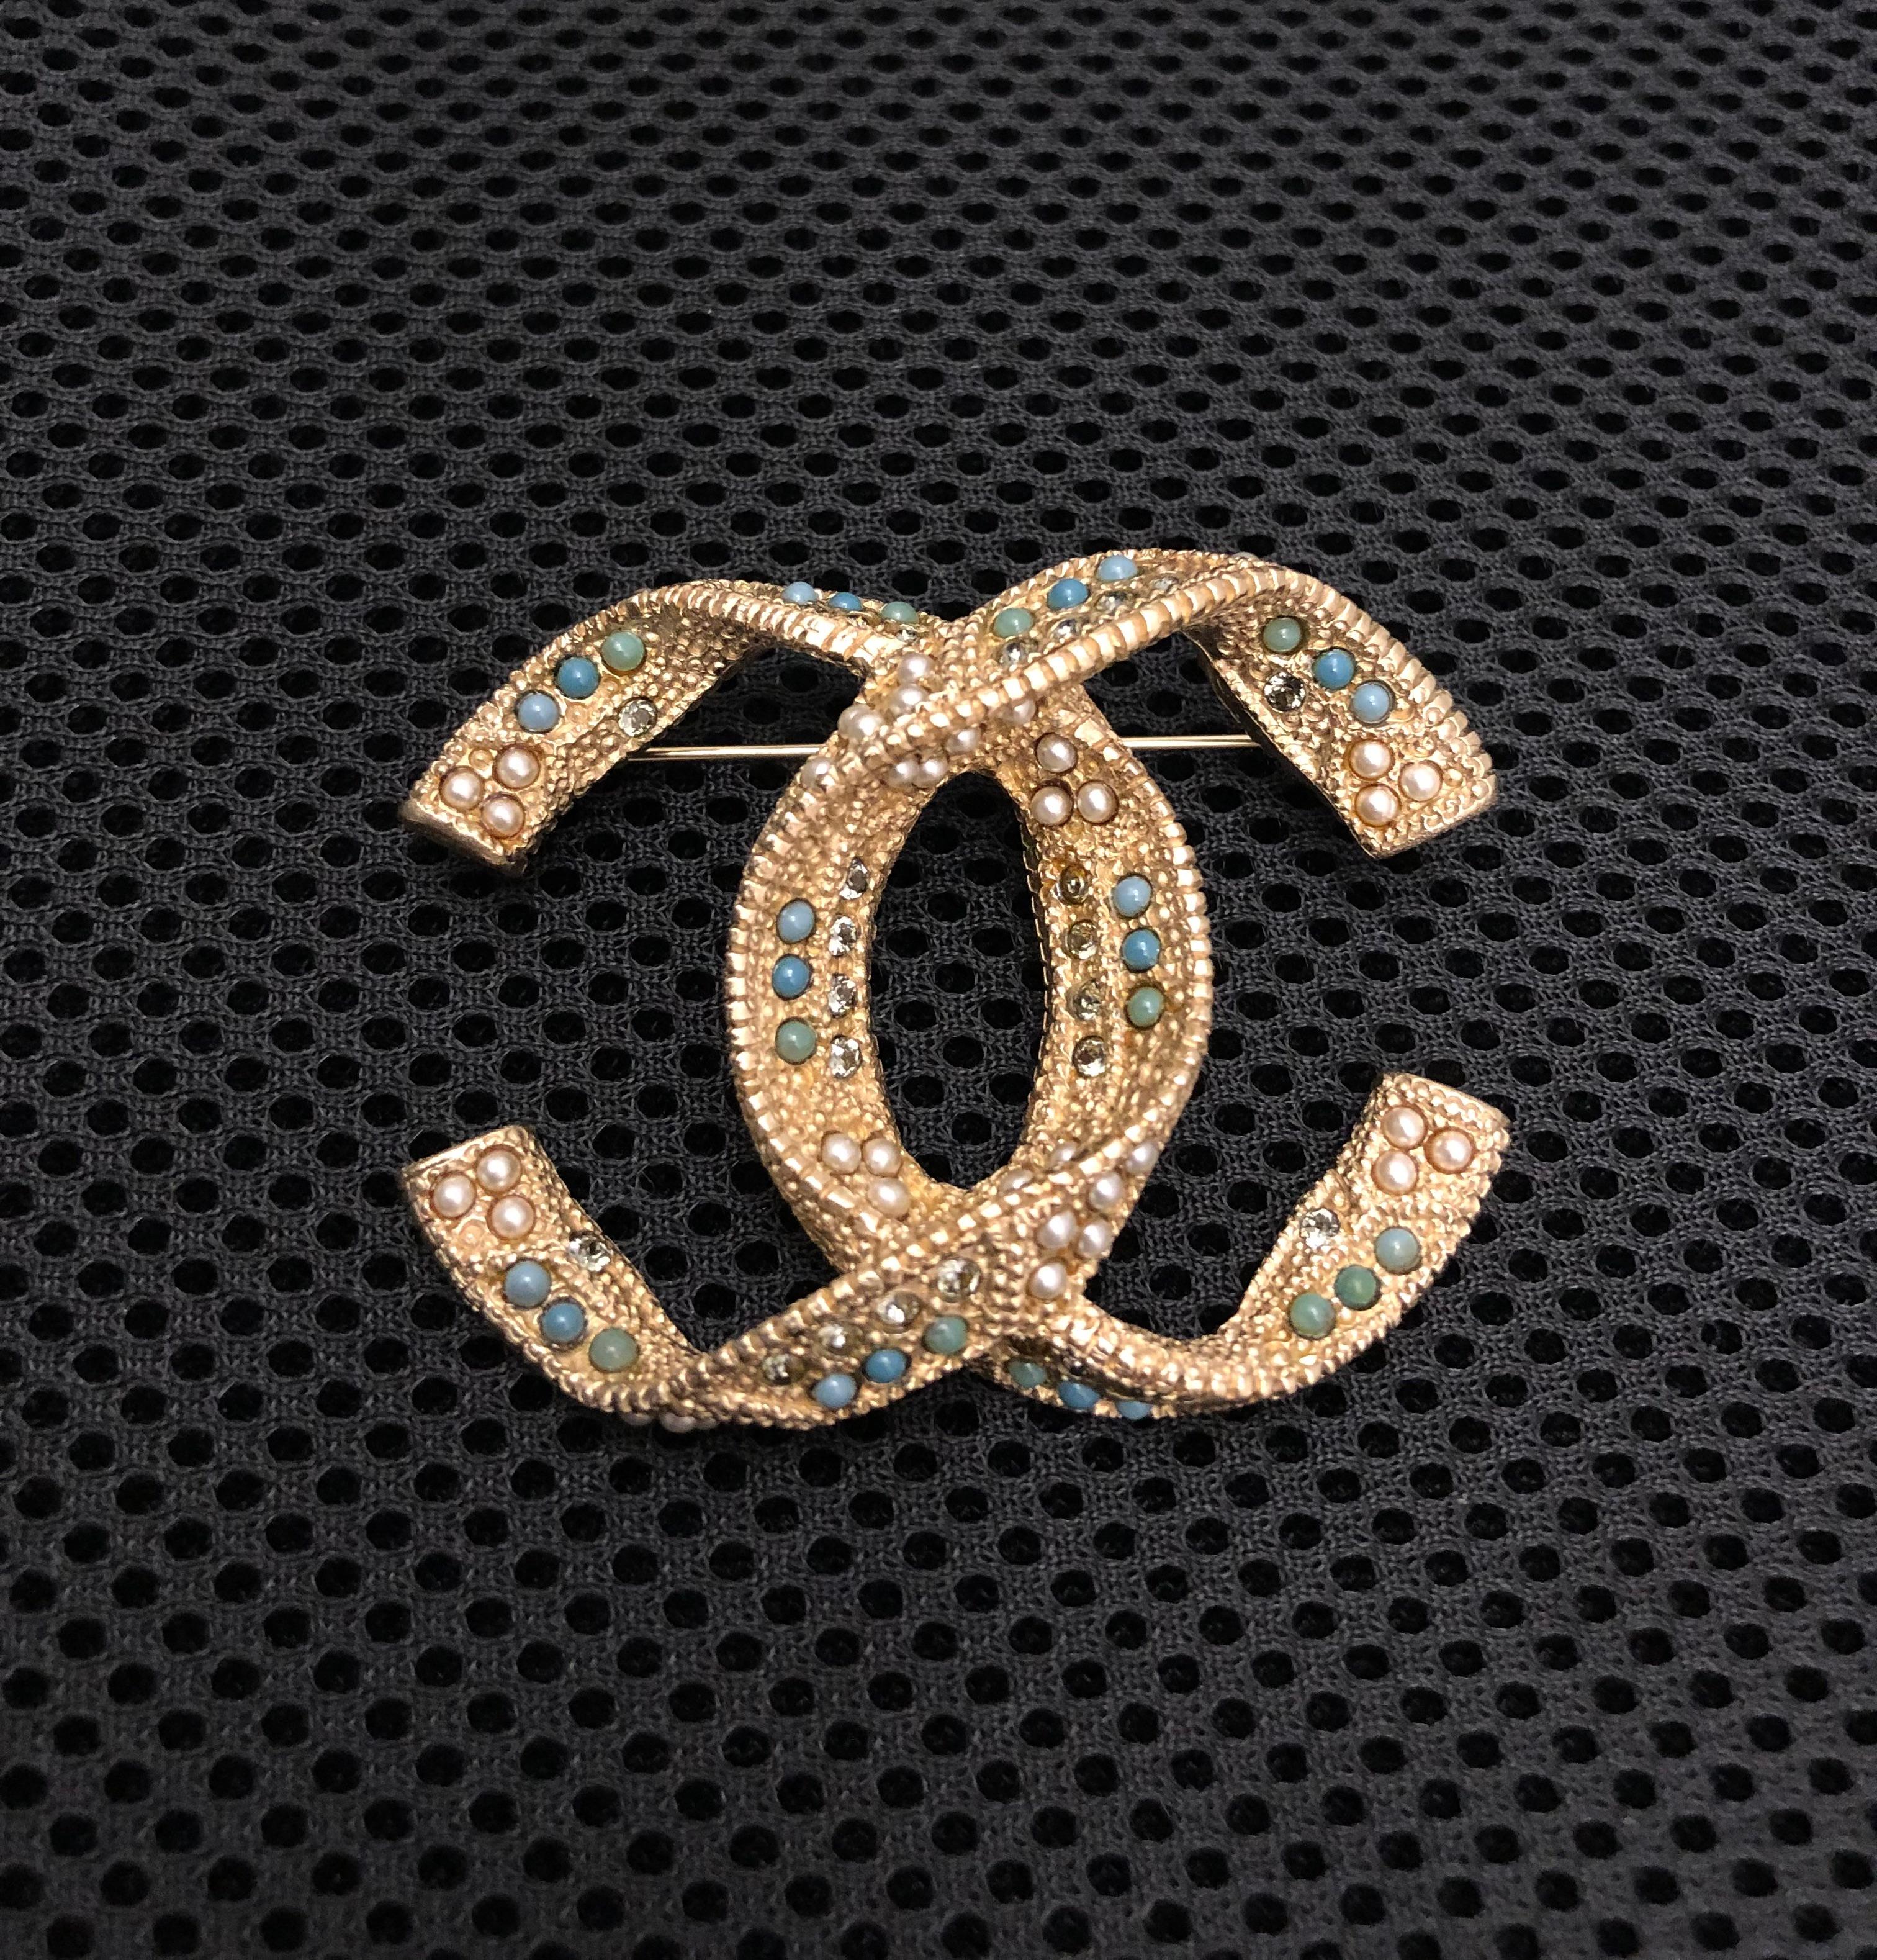 This CHANEL CC brooch is crafted of gold toned metal encrusted with colored faux pearls and rhinestones. Stamped A15 K made in France. Measures approximately 5.6 x 4.2 cm. Comes with box.

Condition: Like new and in excellent condition. Minimal to